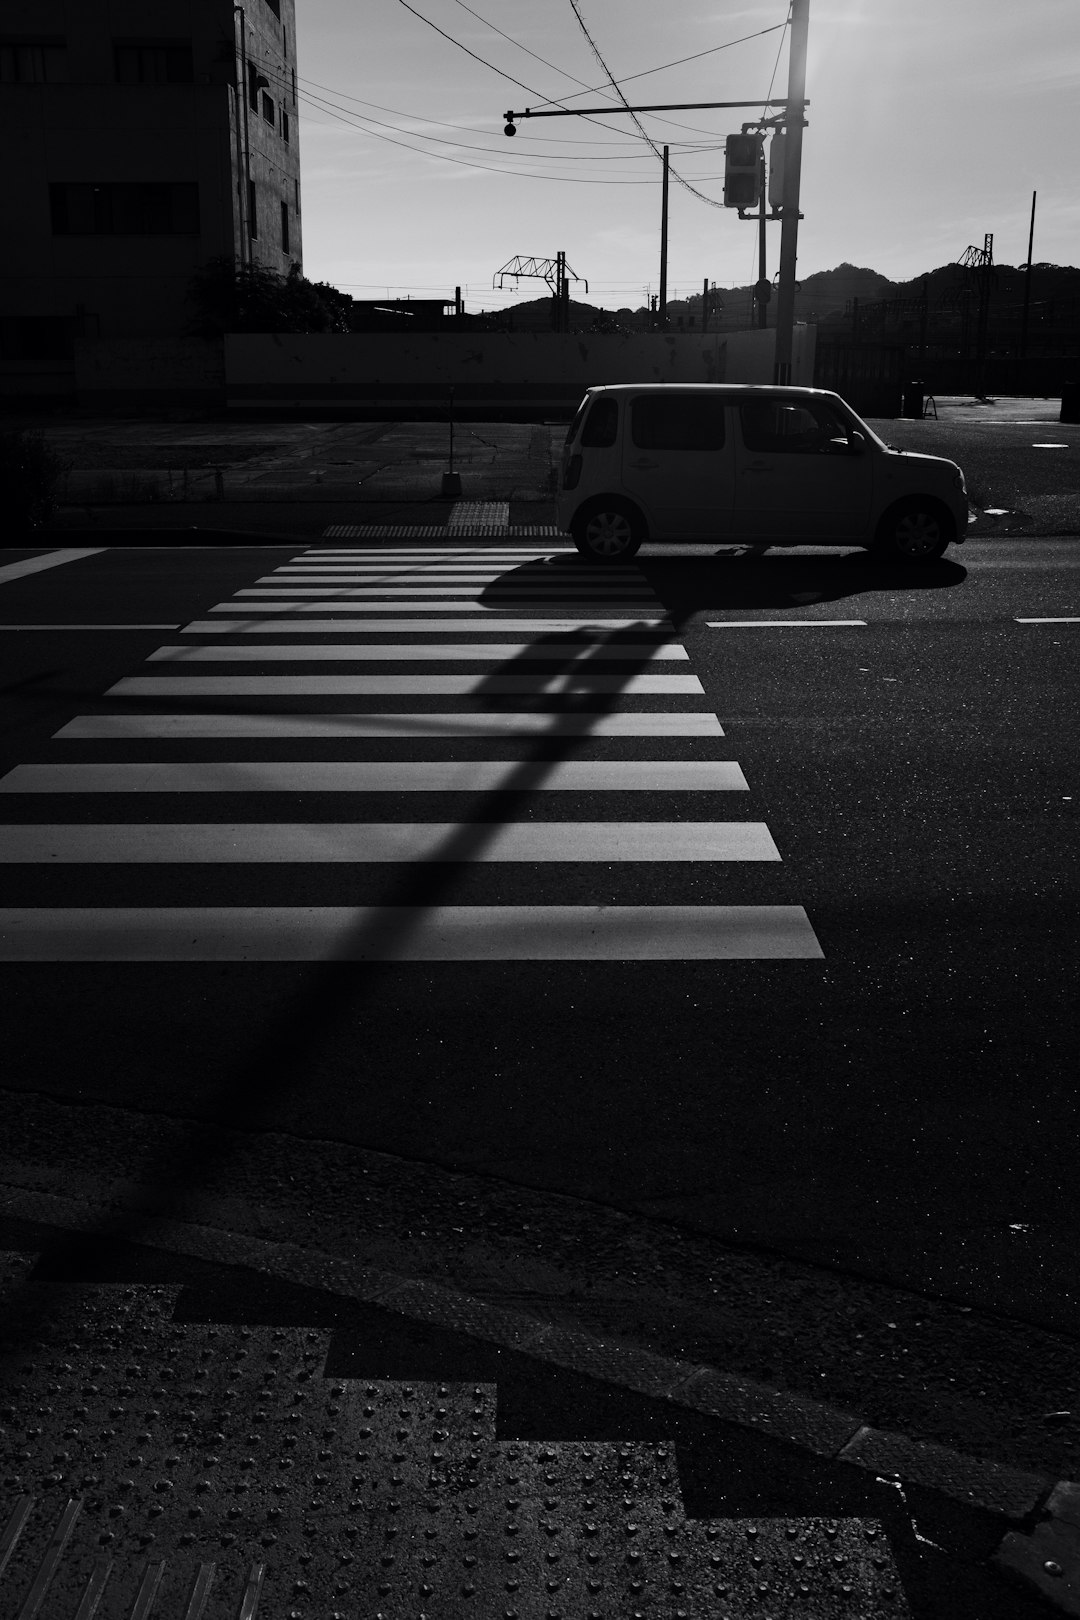 grayscale photo of a car on a pedestrian lane